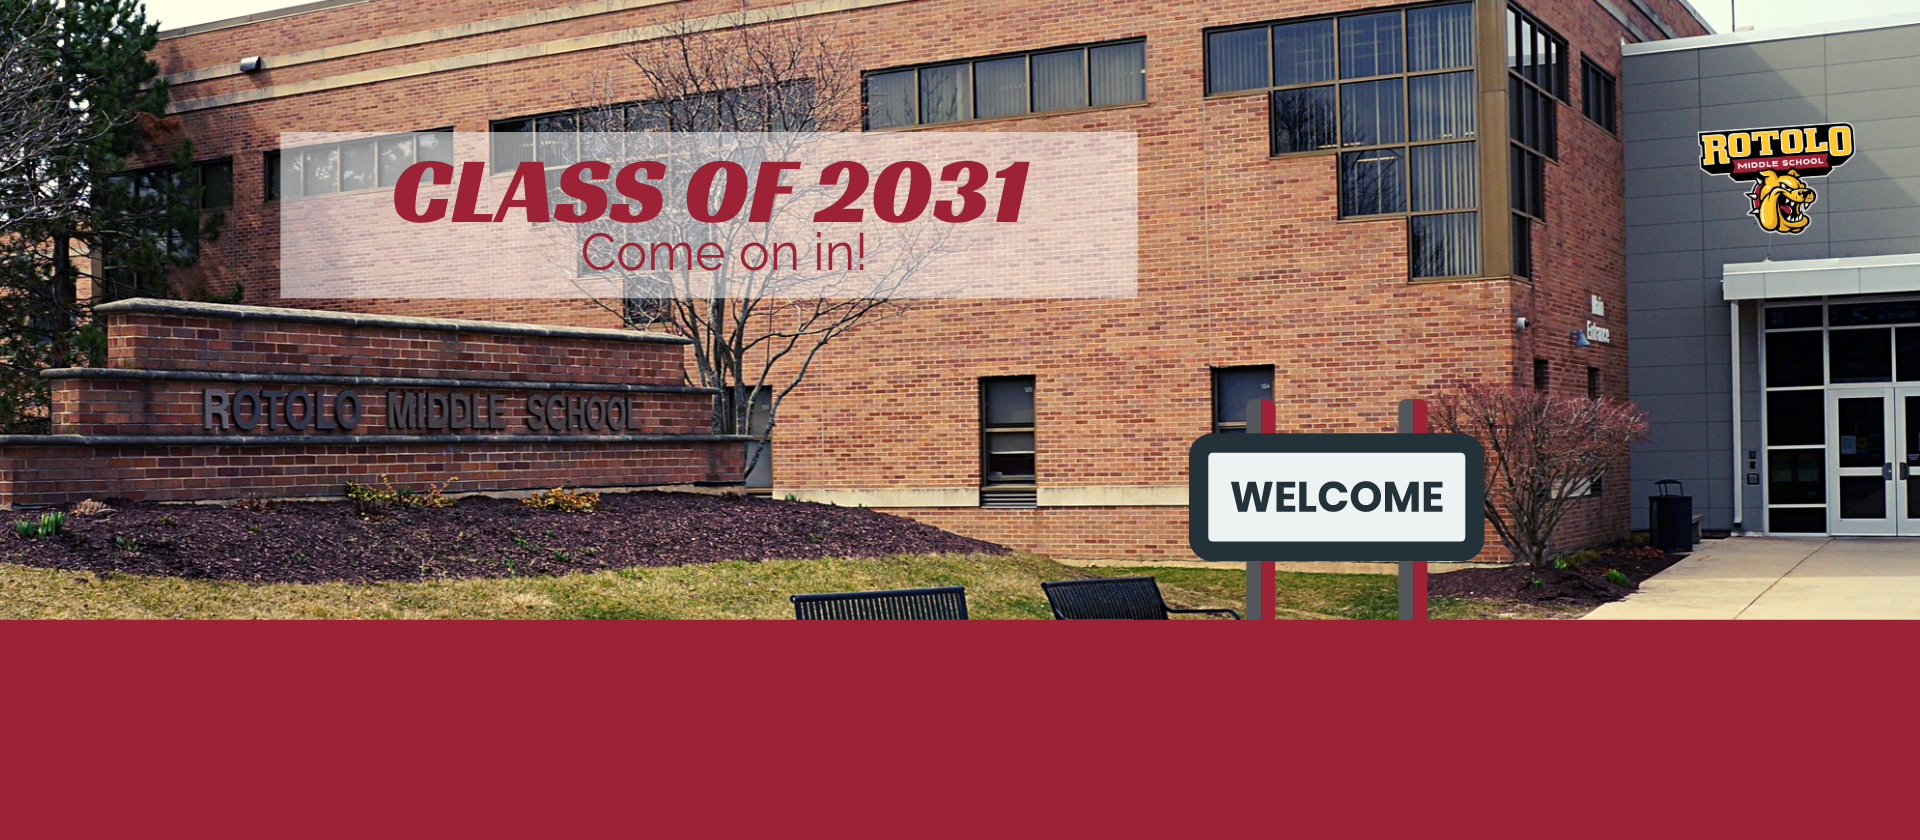 <h2>Class of 2031</h2>
<p class="p2"><span class="s1">Welcome Incoming 6th Graders!</span></p>
<p>&nbsp;</p>
<p><a href="https://rms.bps101.net/classof2031/">Click for more info!</a></p>
